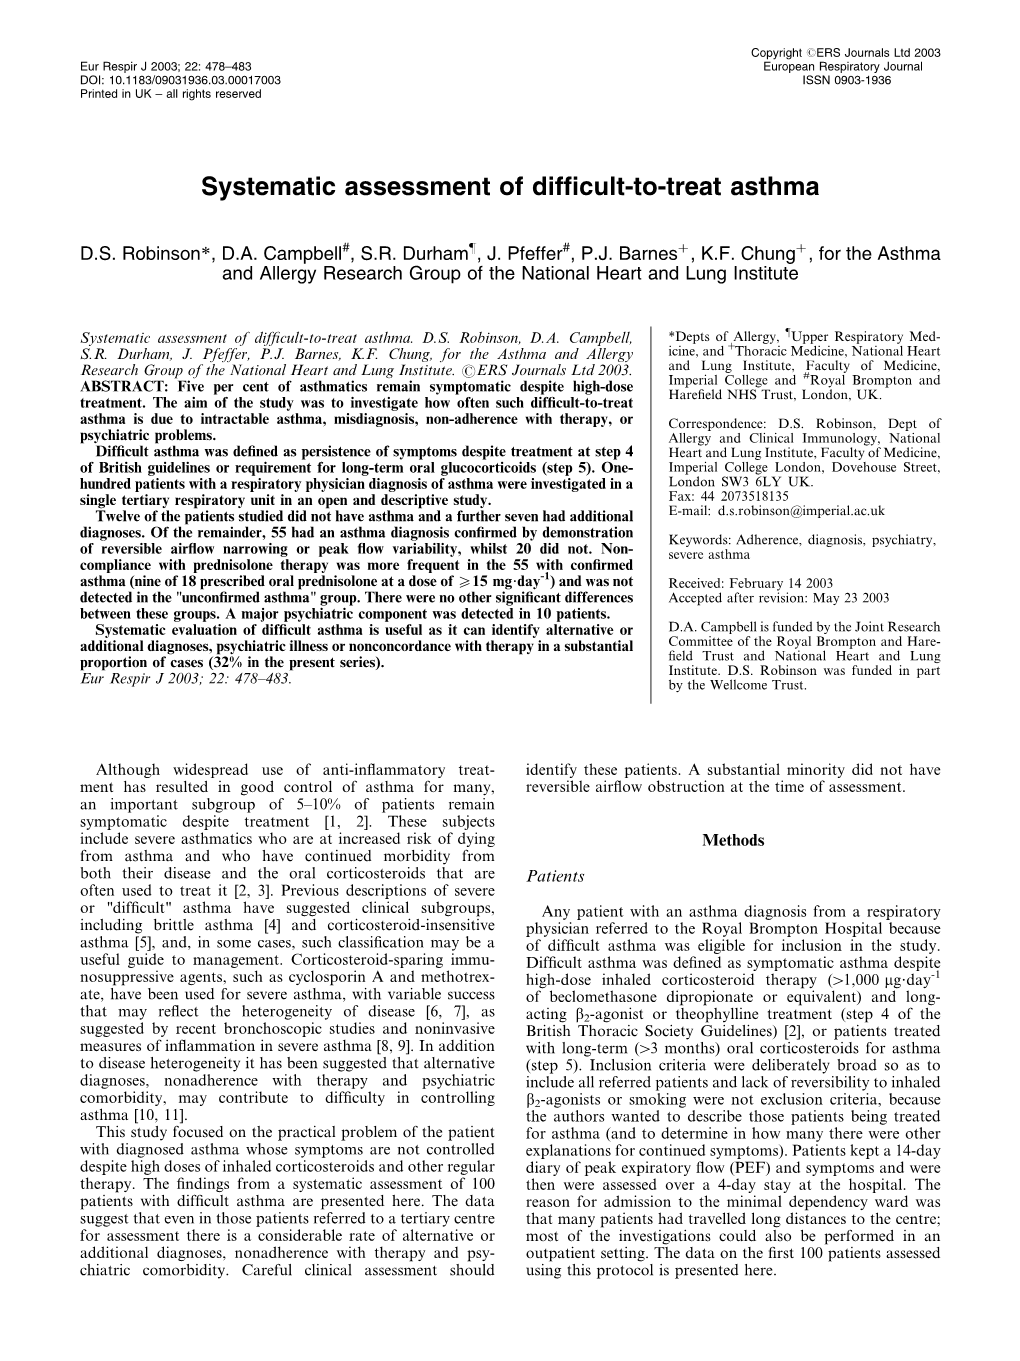 Systematic Assessment of Difficult-To-Treat Asthma 479